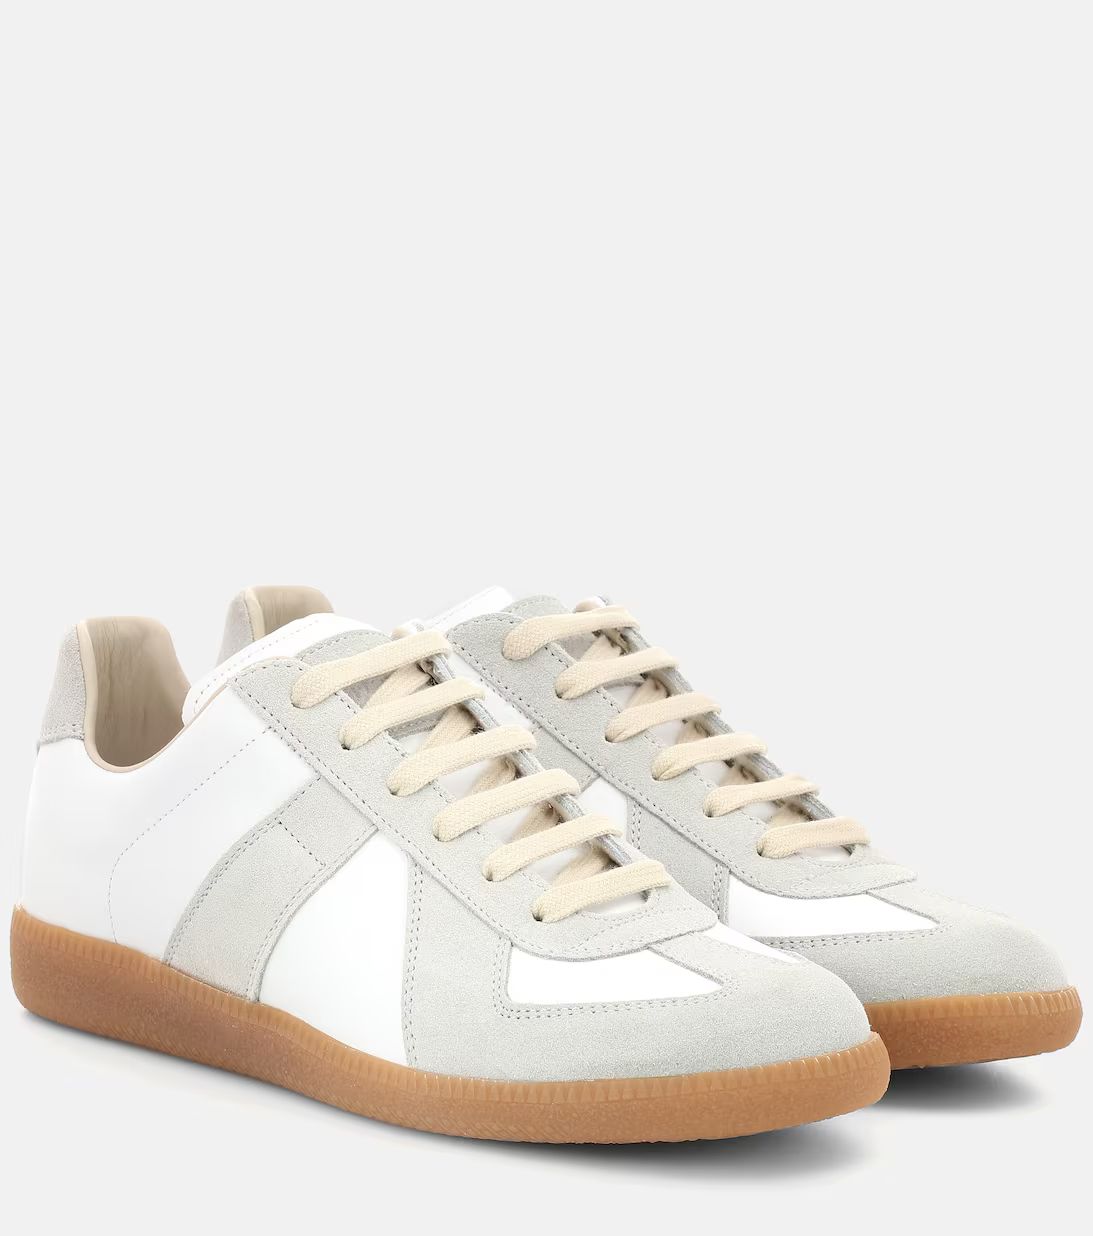 Replica leather and suede sneakers | Mytheresa (UK)